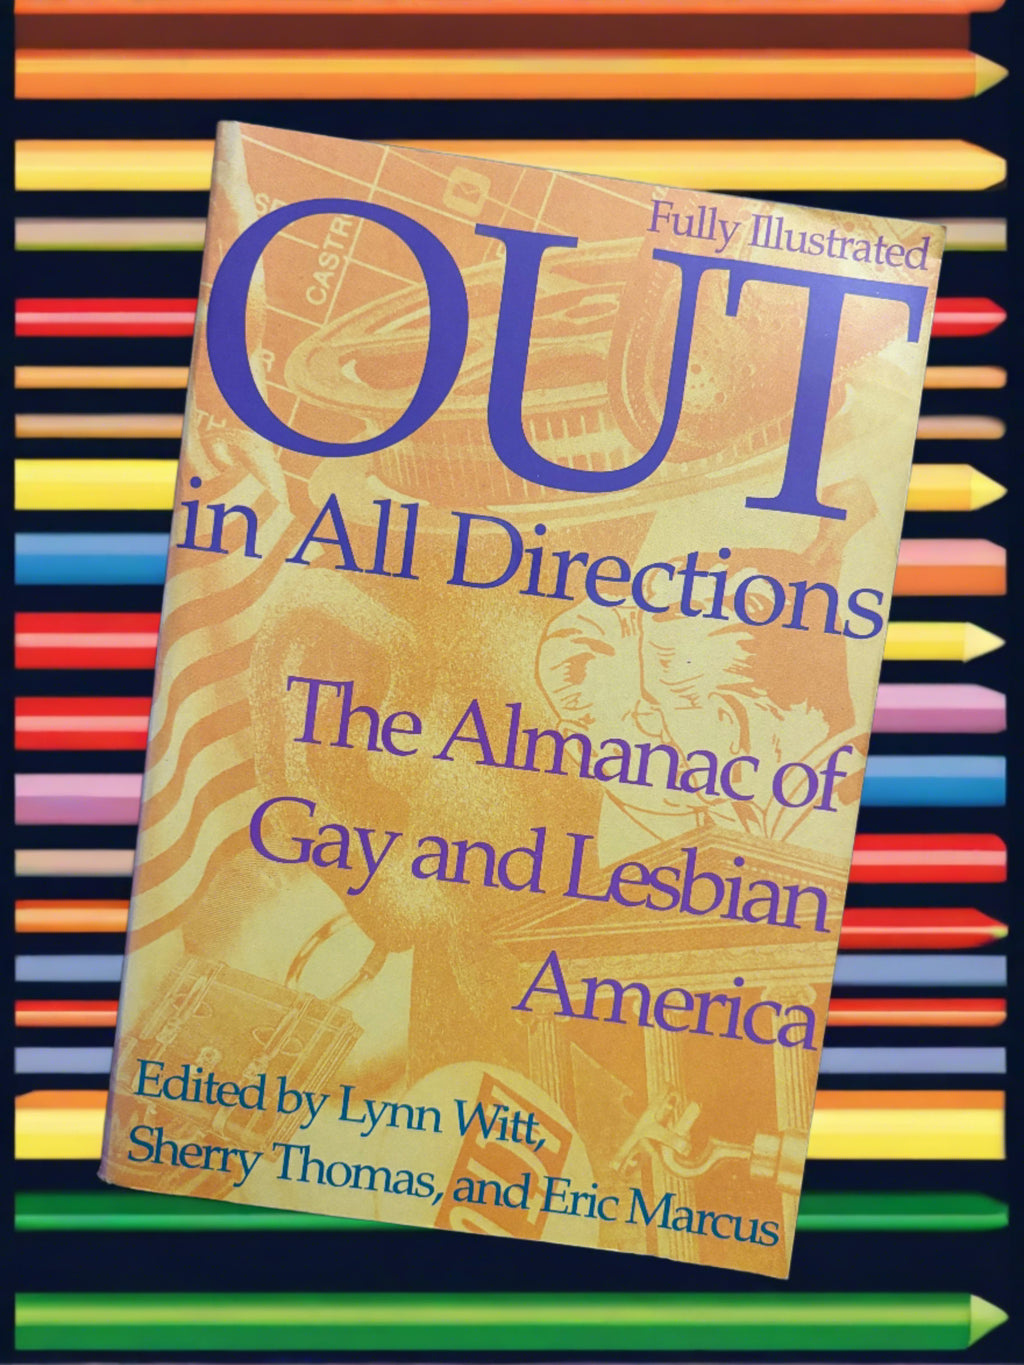 OUT in All Directions: The Almanac of Gay and Lesbian America- Edited by Lynn Witt, Sherry Thomas, and Eric Marcus